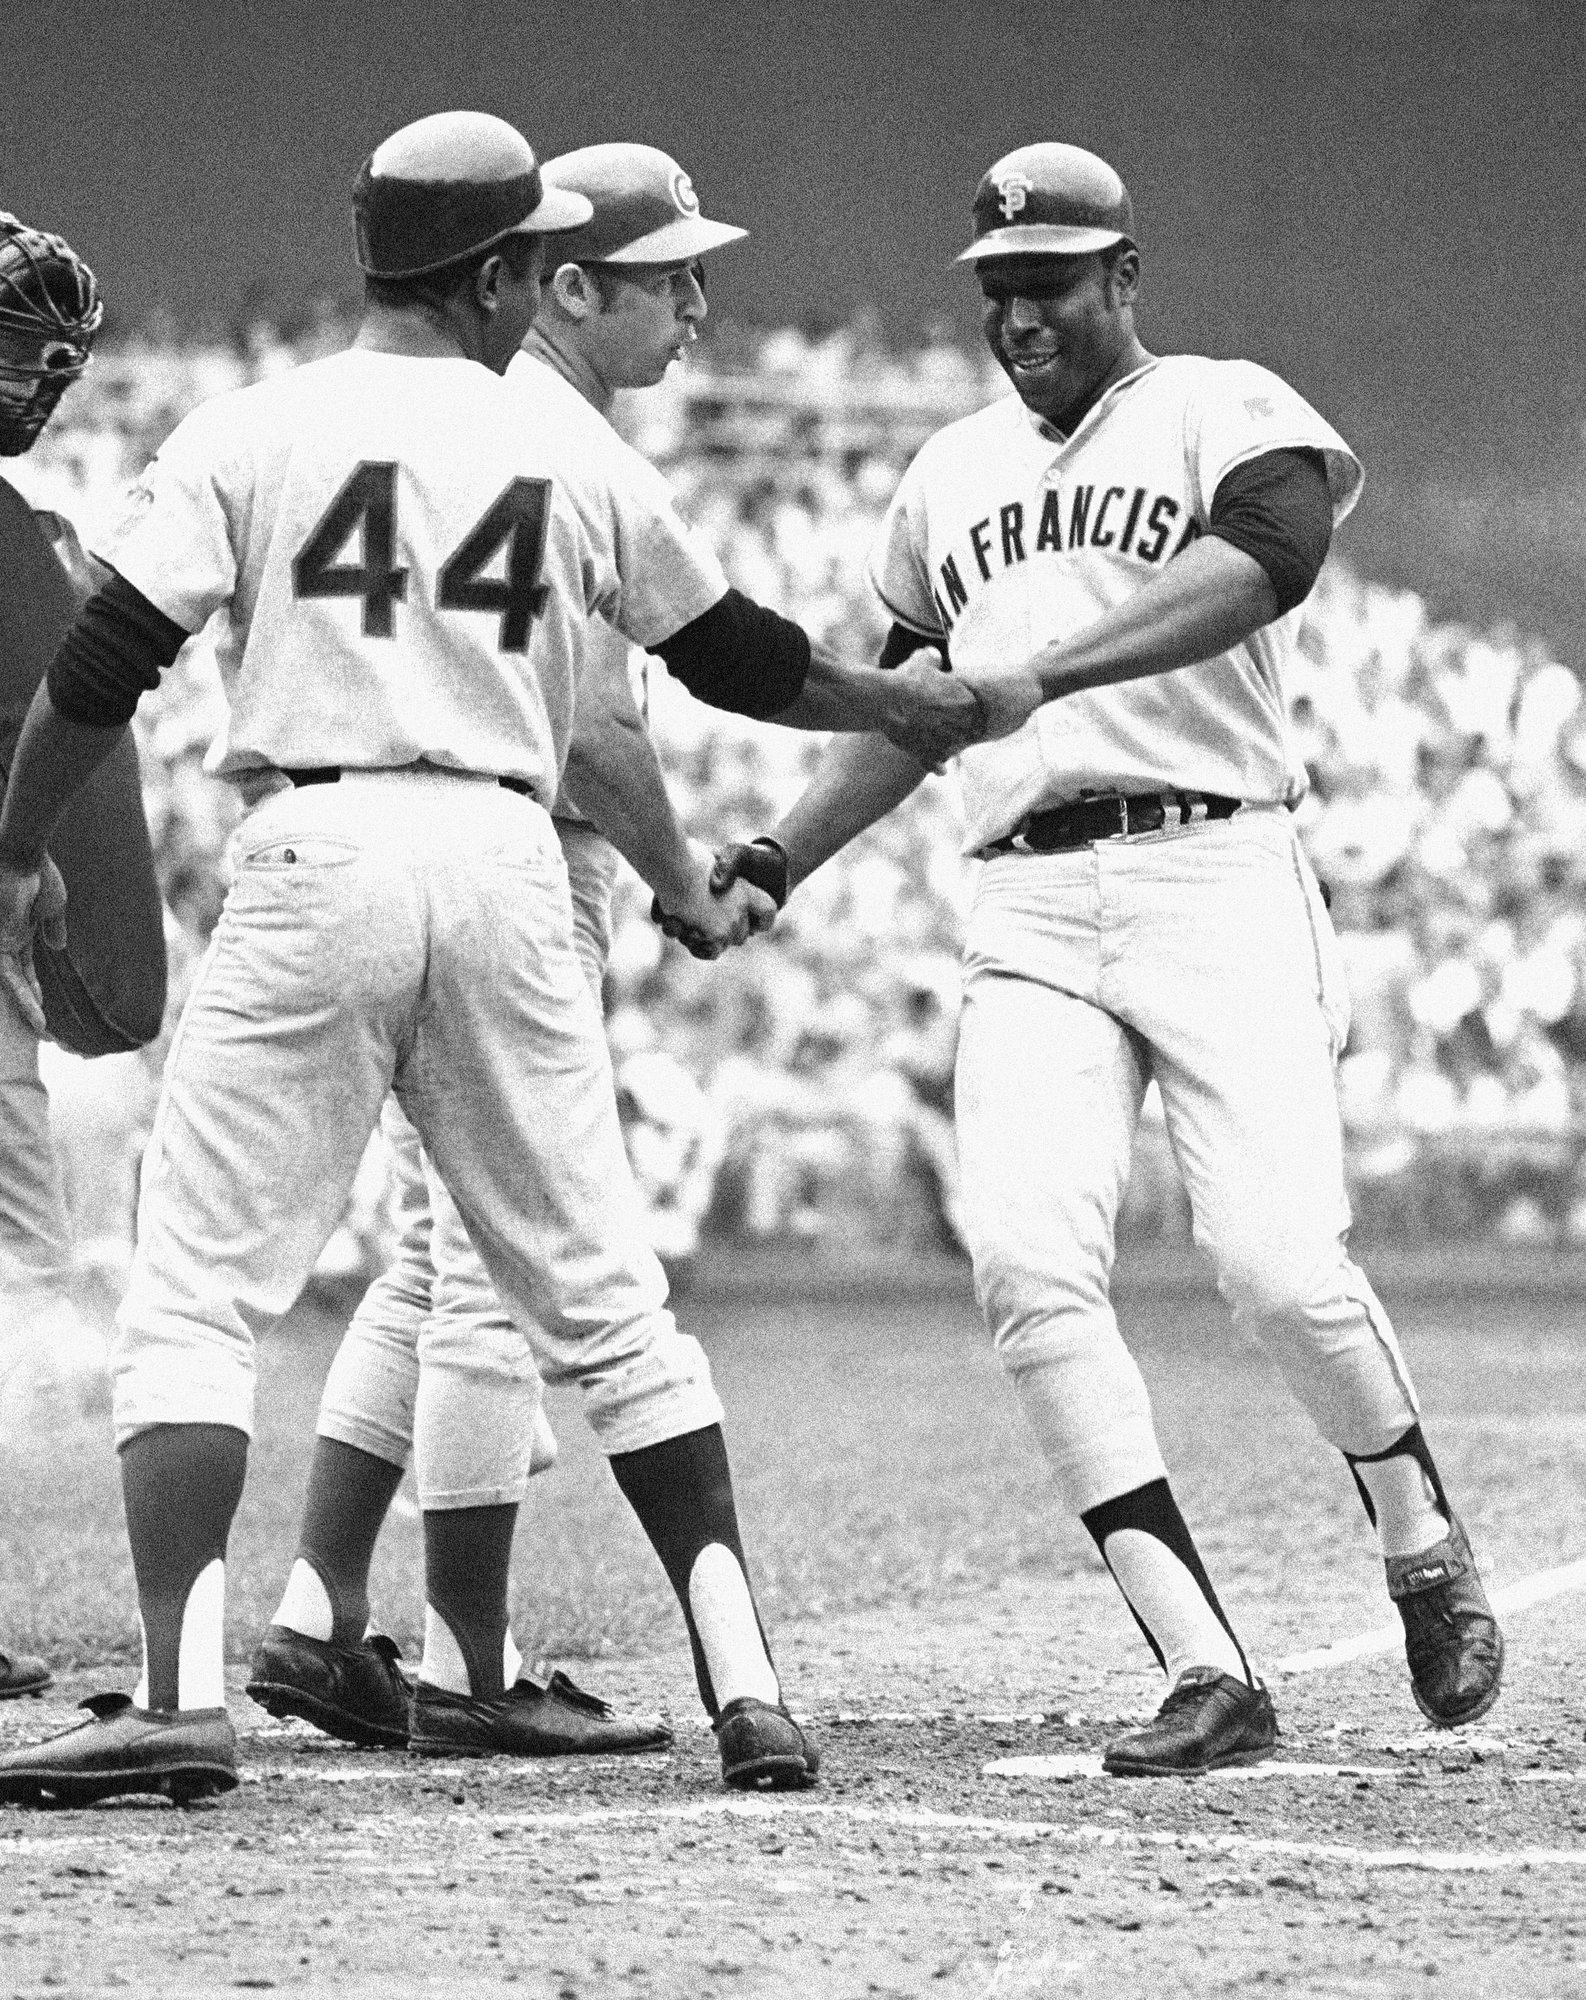 Giants Hall of Famer Willie McCovey has died at age 80 – WKTY